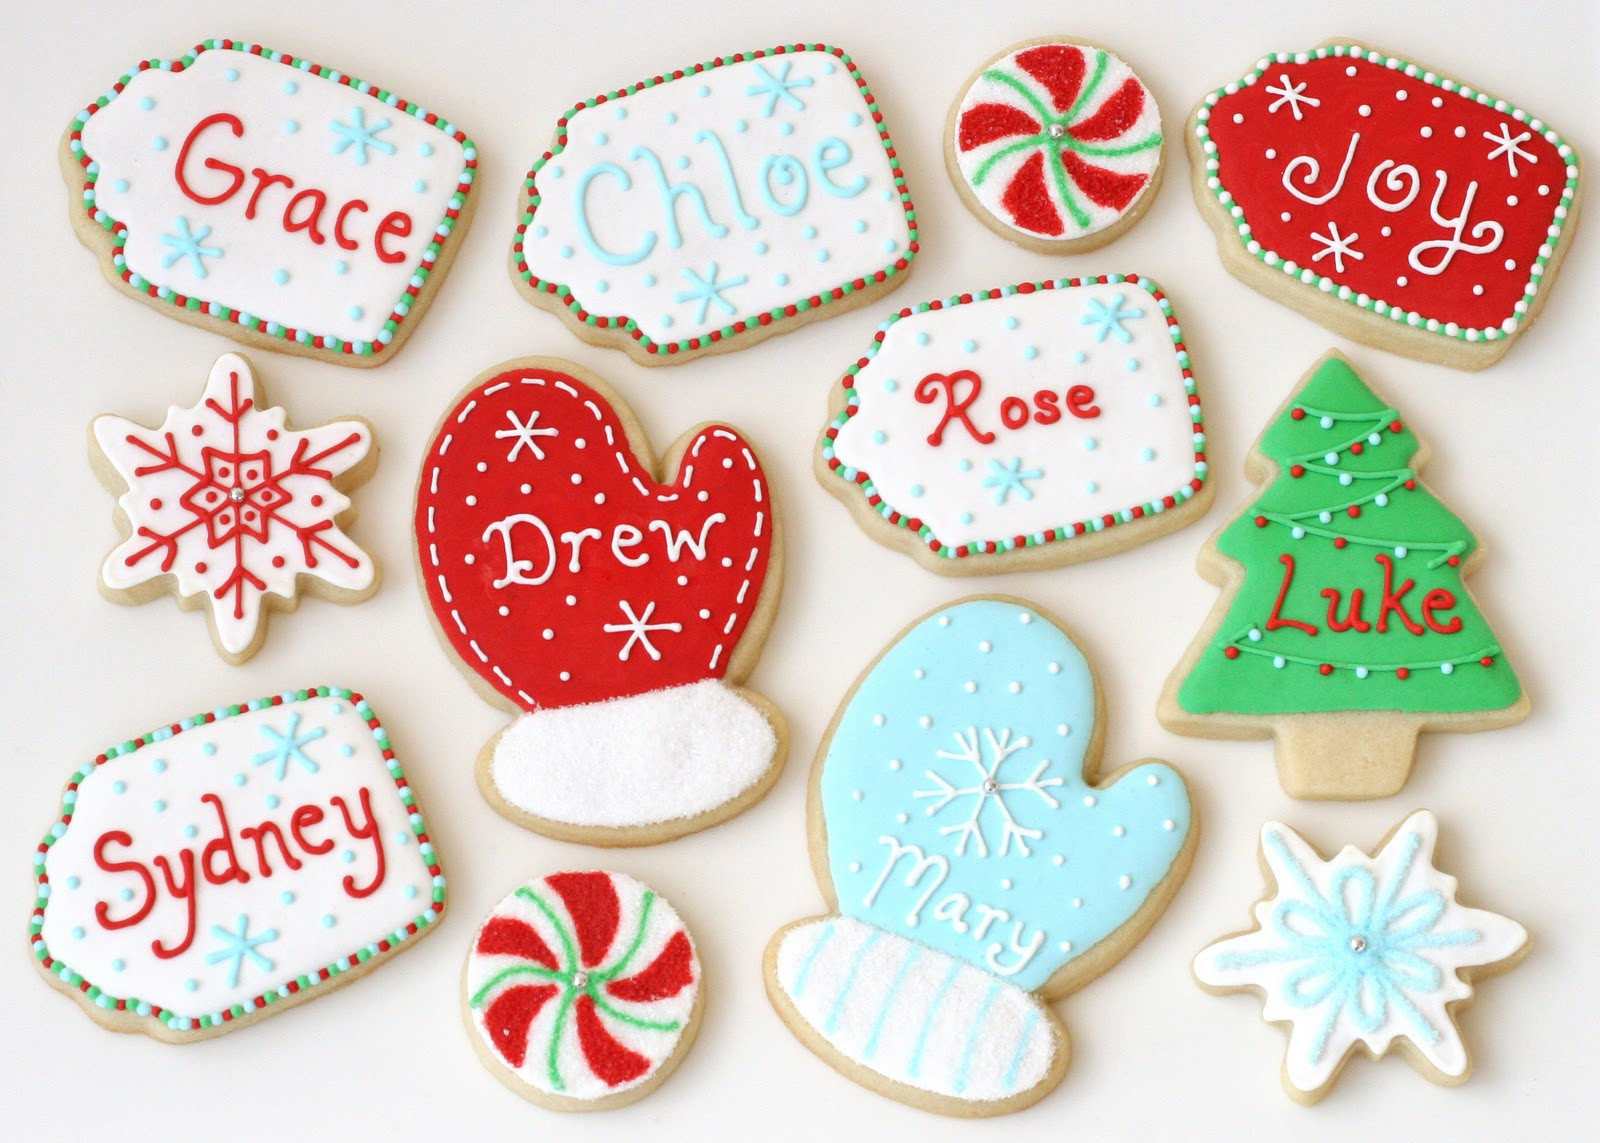 Decorated Christmas Cookies
 Christmas Cookies Galore Glorious Treats